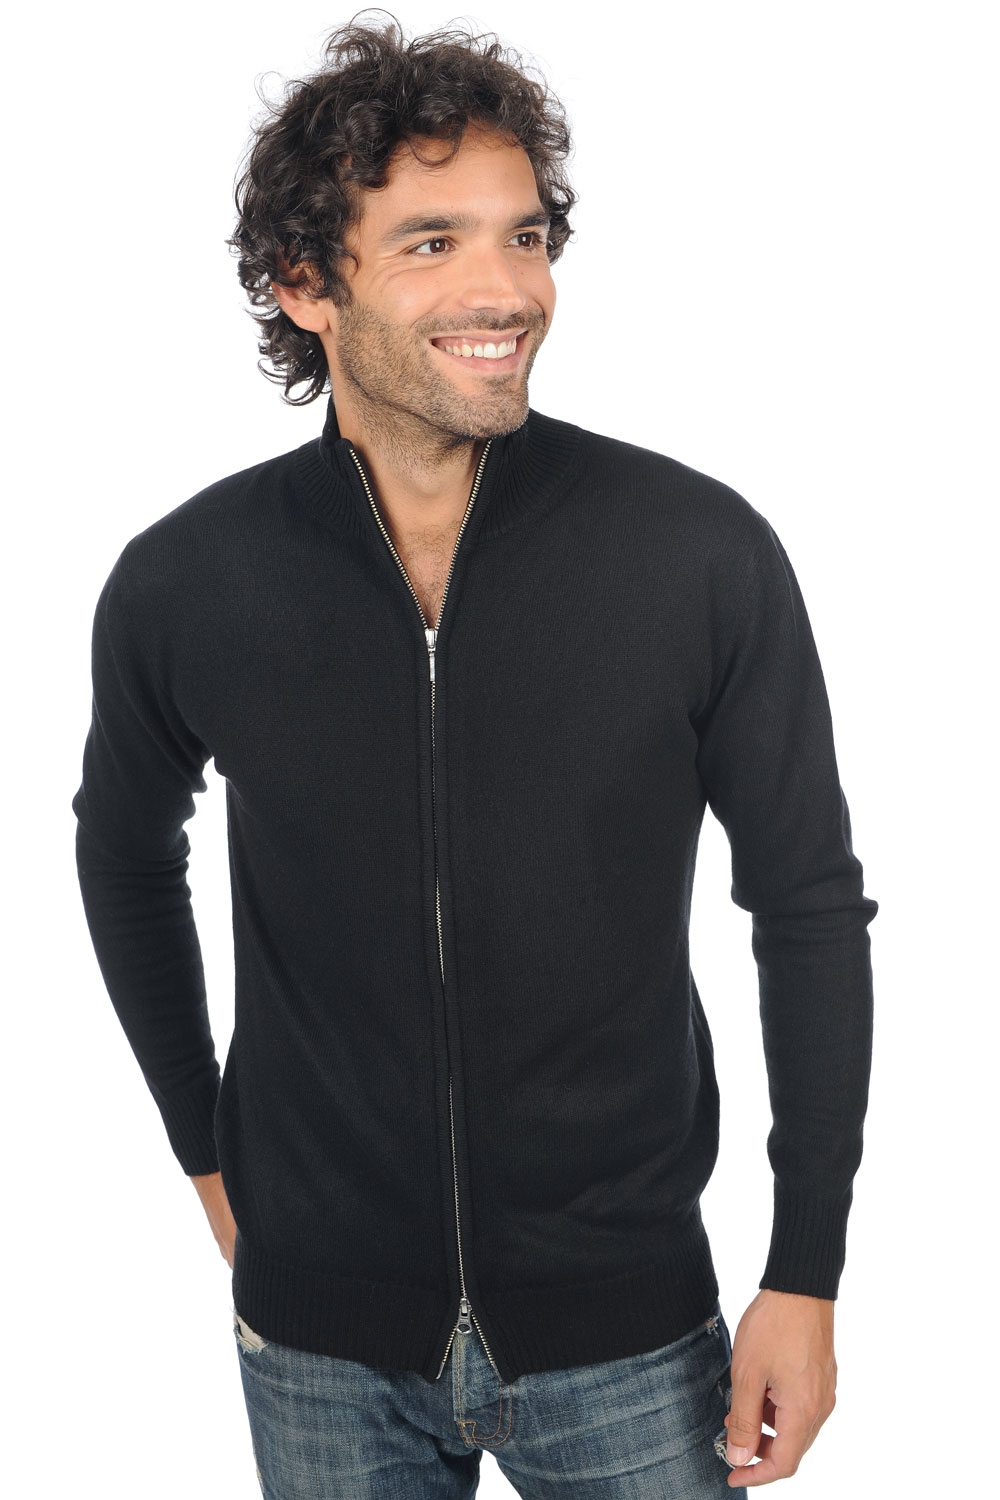 Cashmere men basic sweaters at low prices thobias first black xl